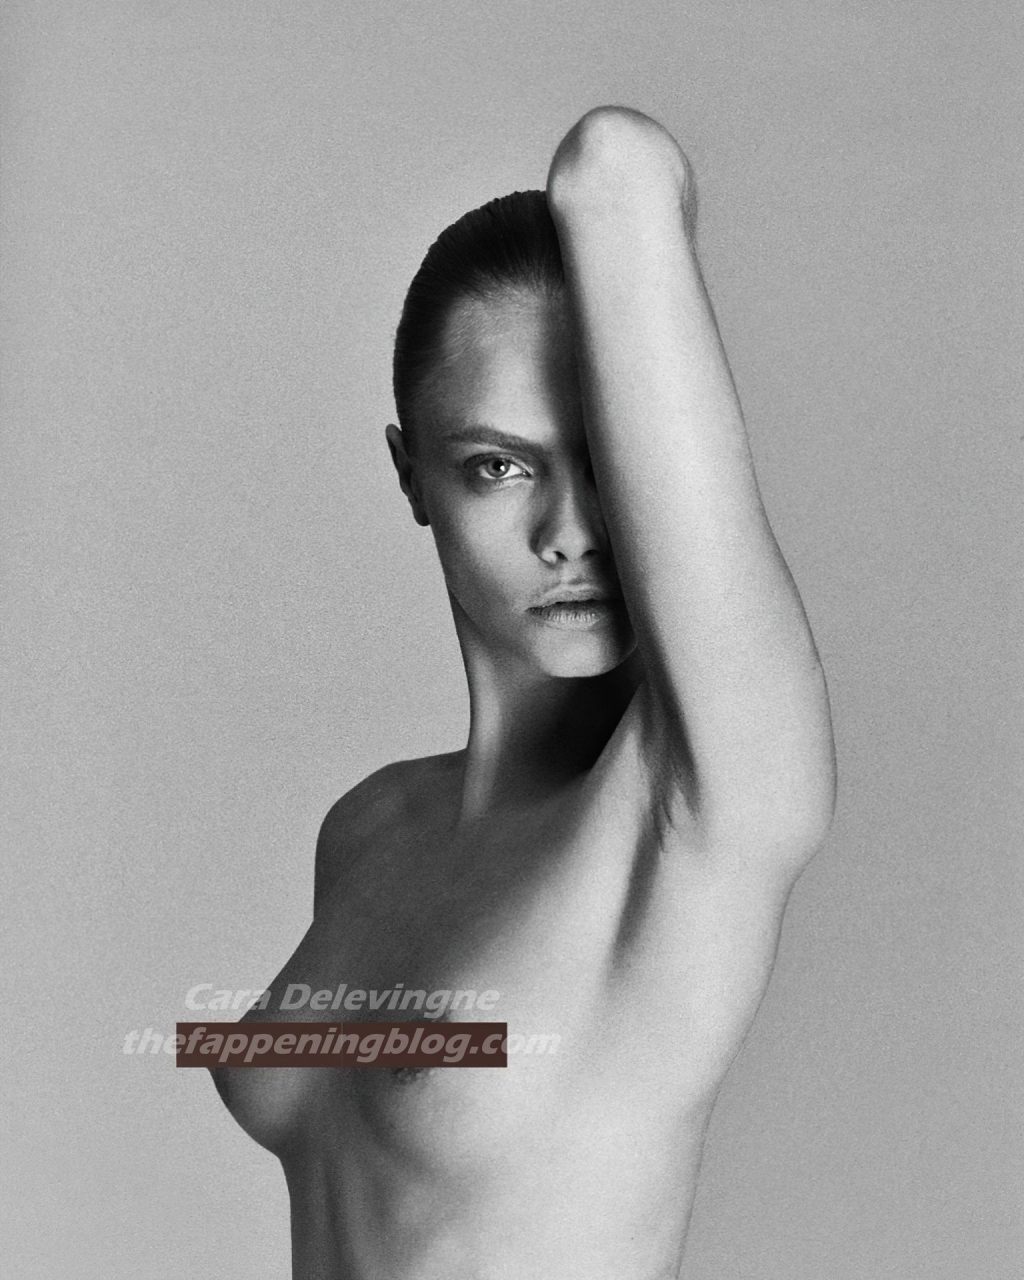 Cara delevingne the fappening